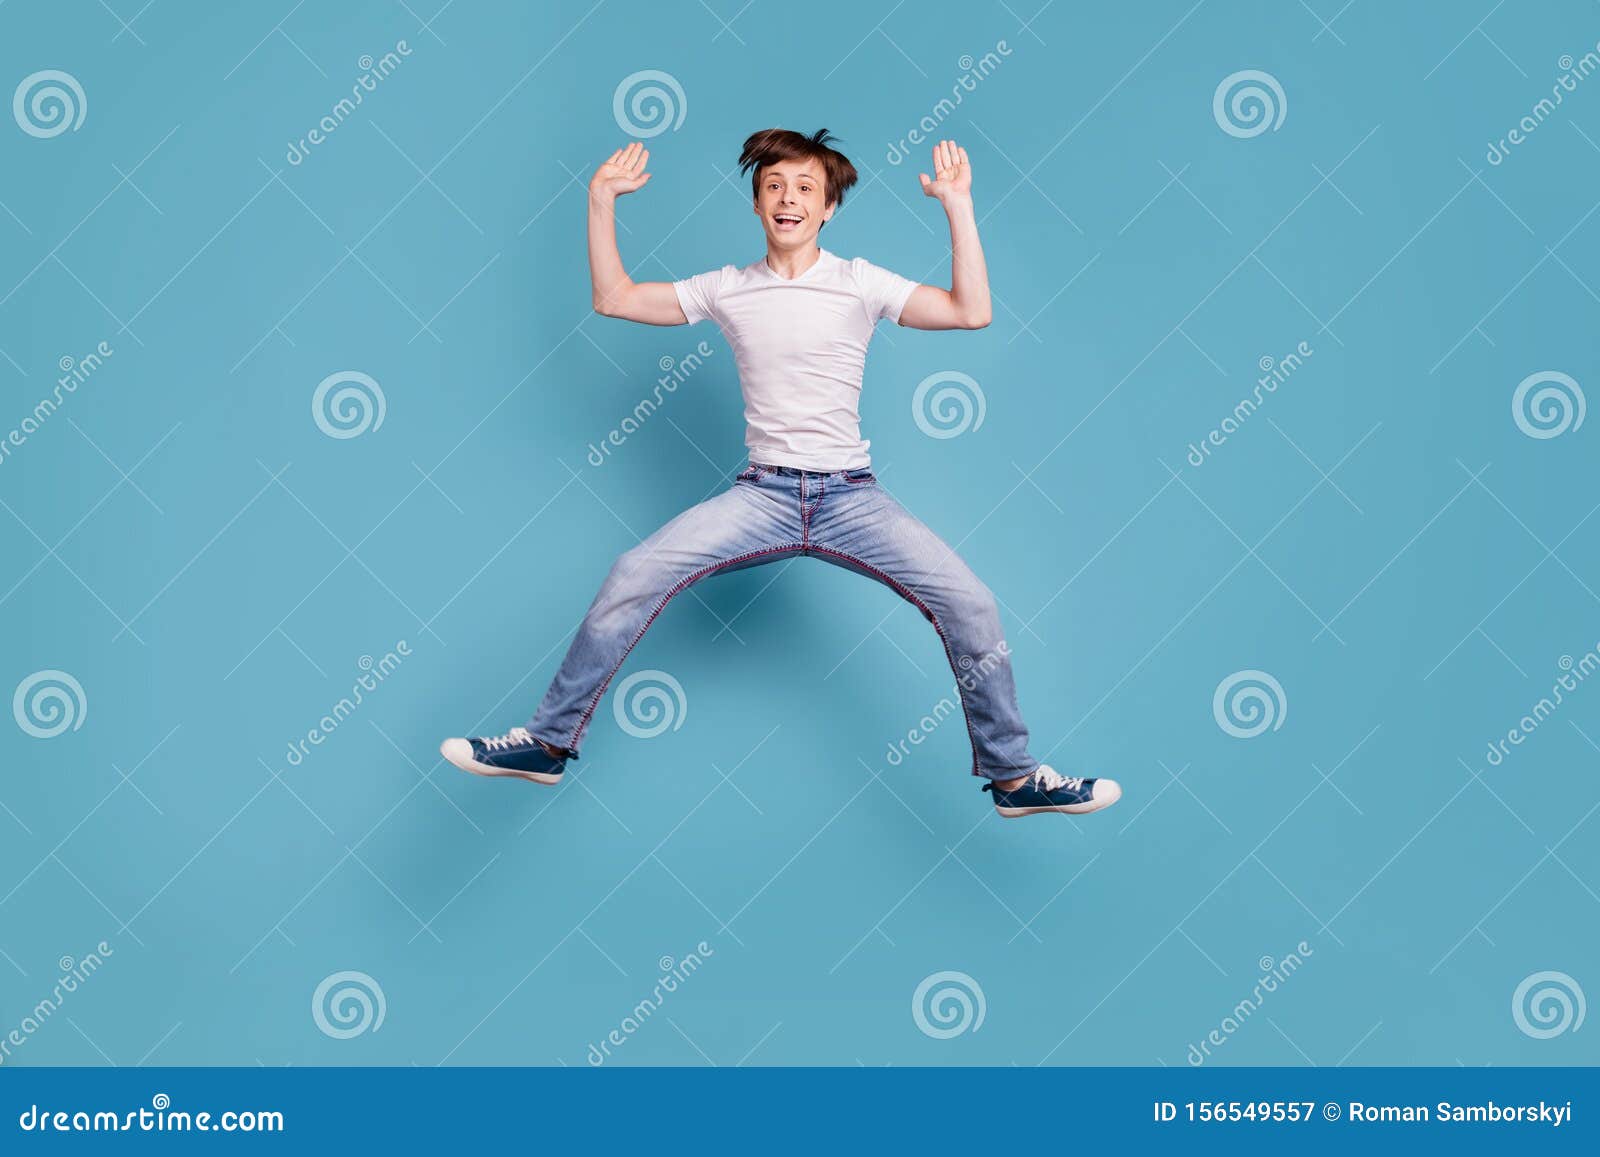 Full Length Body Size Photo of Boy Preparing To Do Splits Right in Air ...